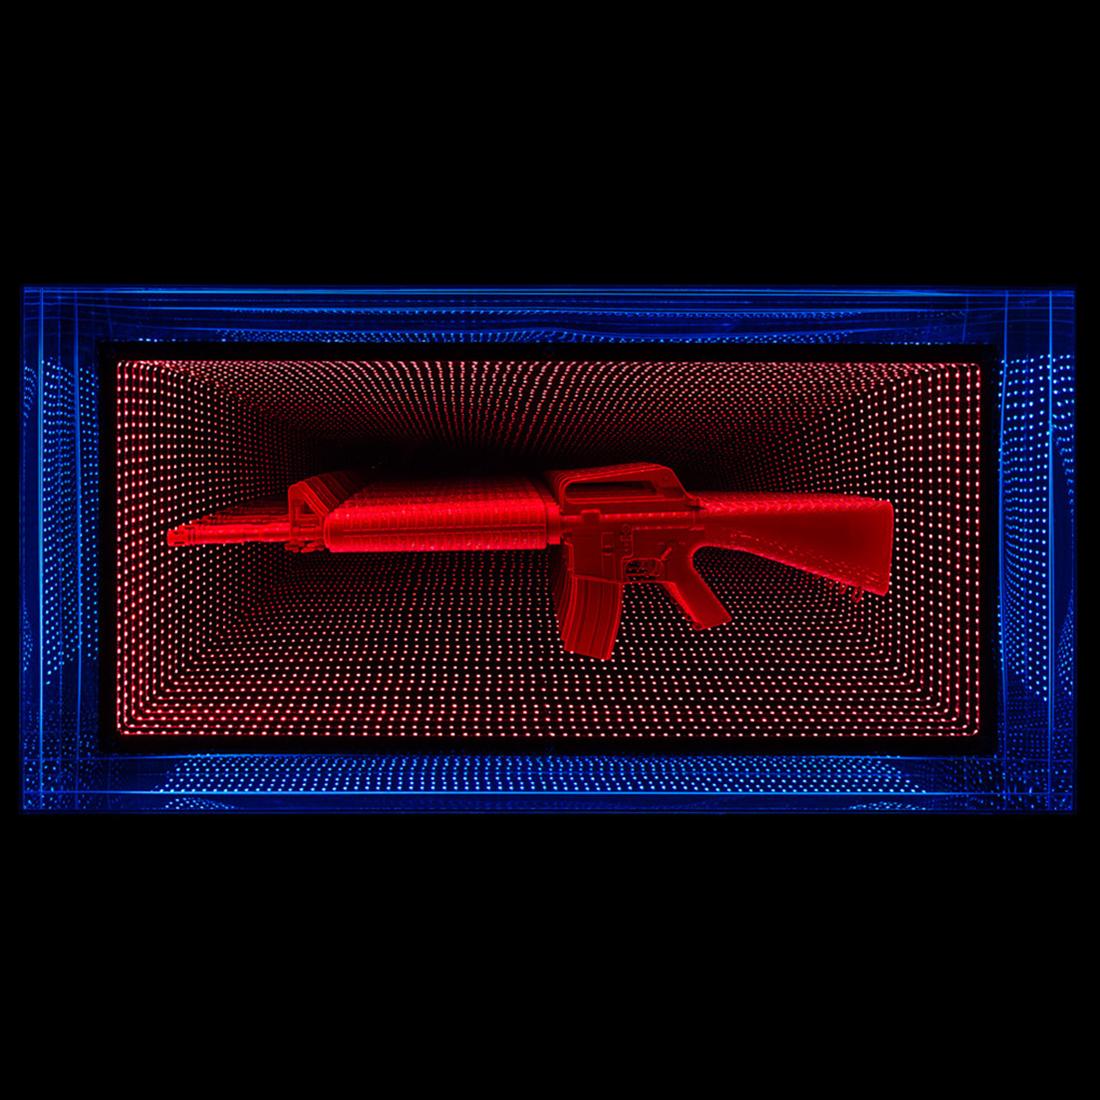 Mirror M16 Art LED Light wall decoration mirror made
with mirrored led lights with glass and Plexiglas
creating an infinity mirrored effect. With an art demo
gun M16 in resin. Exceptional piece made in 2021
by Raphael Fenice.